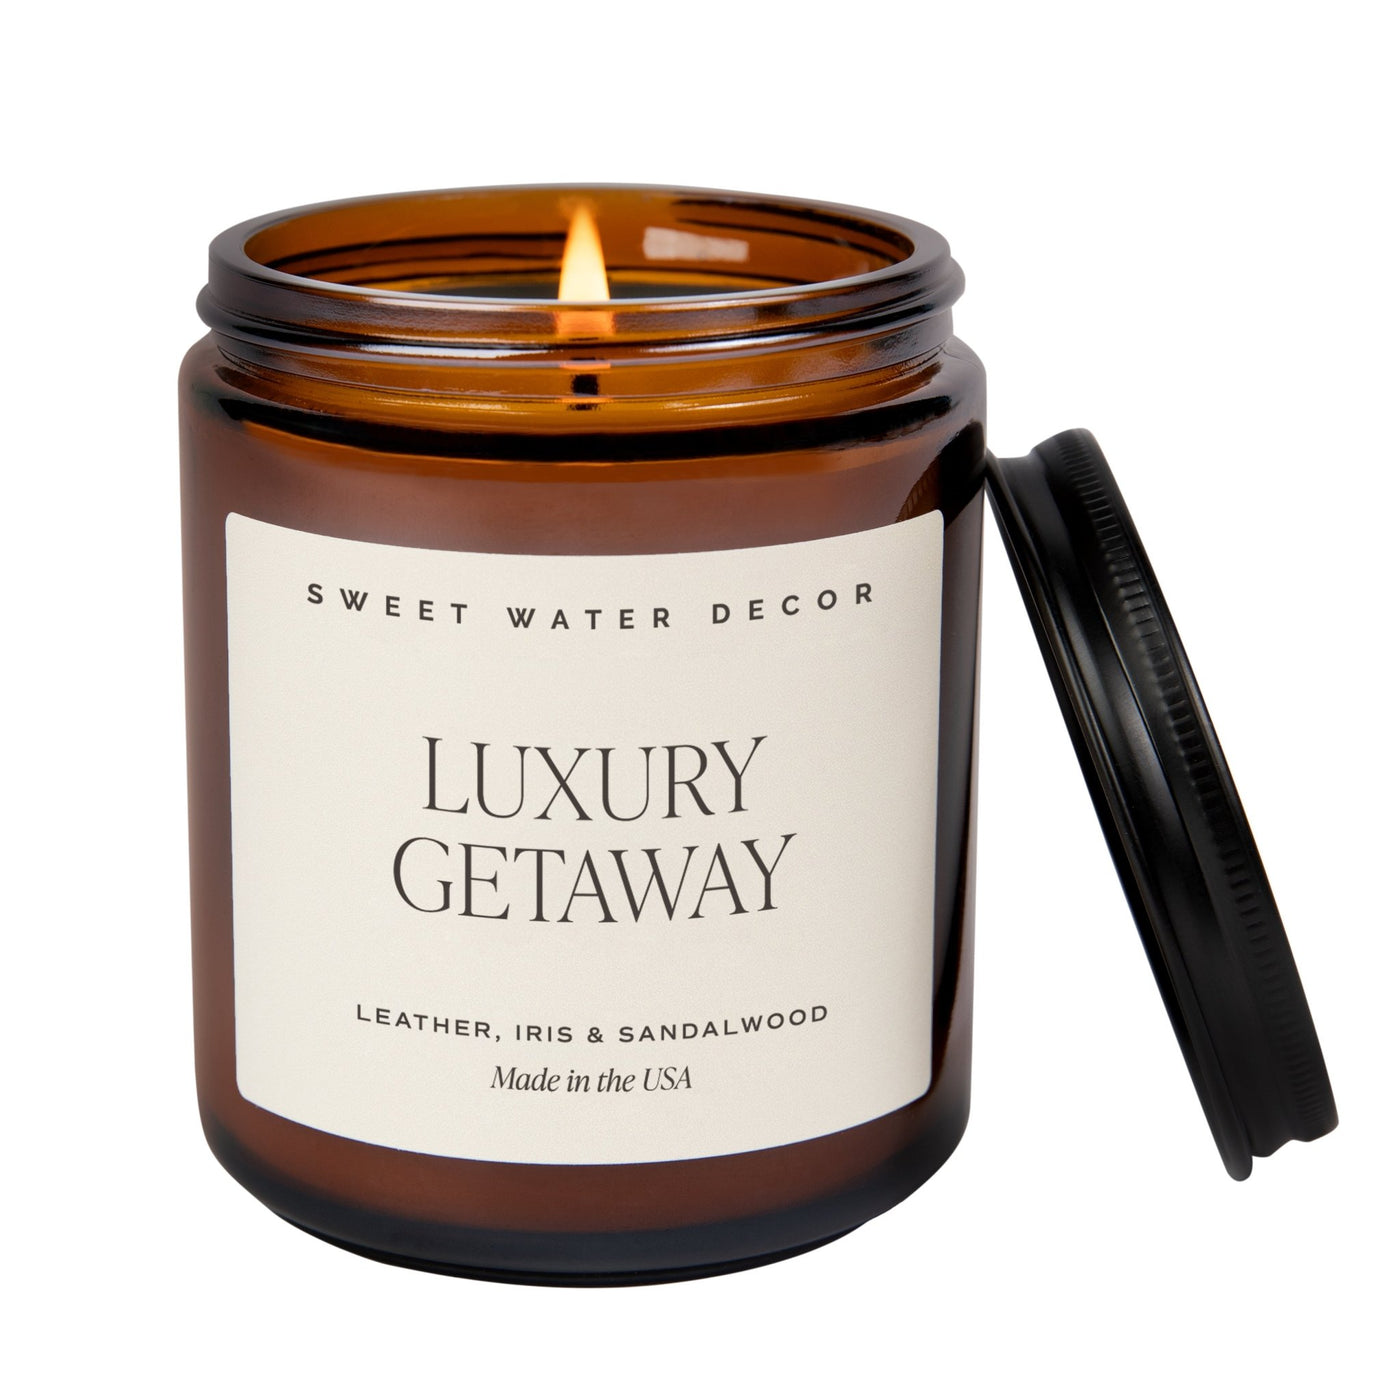 Luxury Getaway Soy Candle - Amber Jar - 9 oz - Sweet Water Decor - Candles